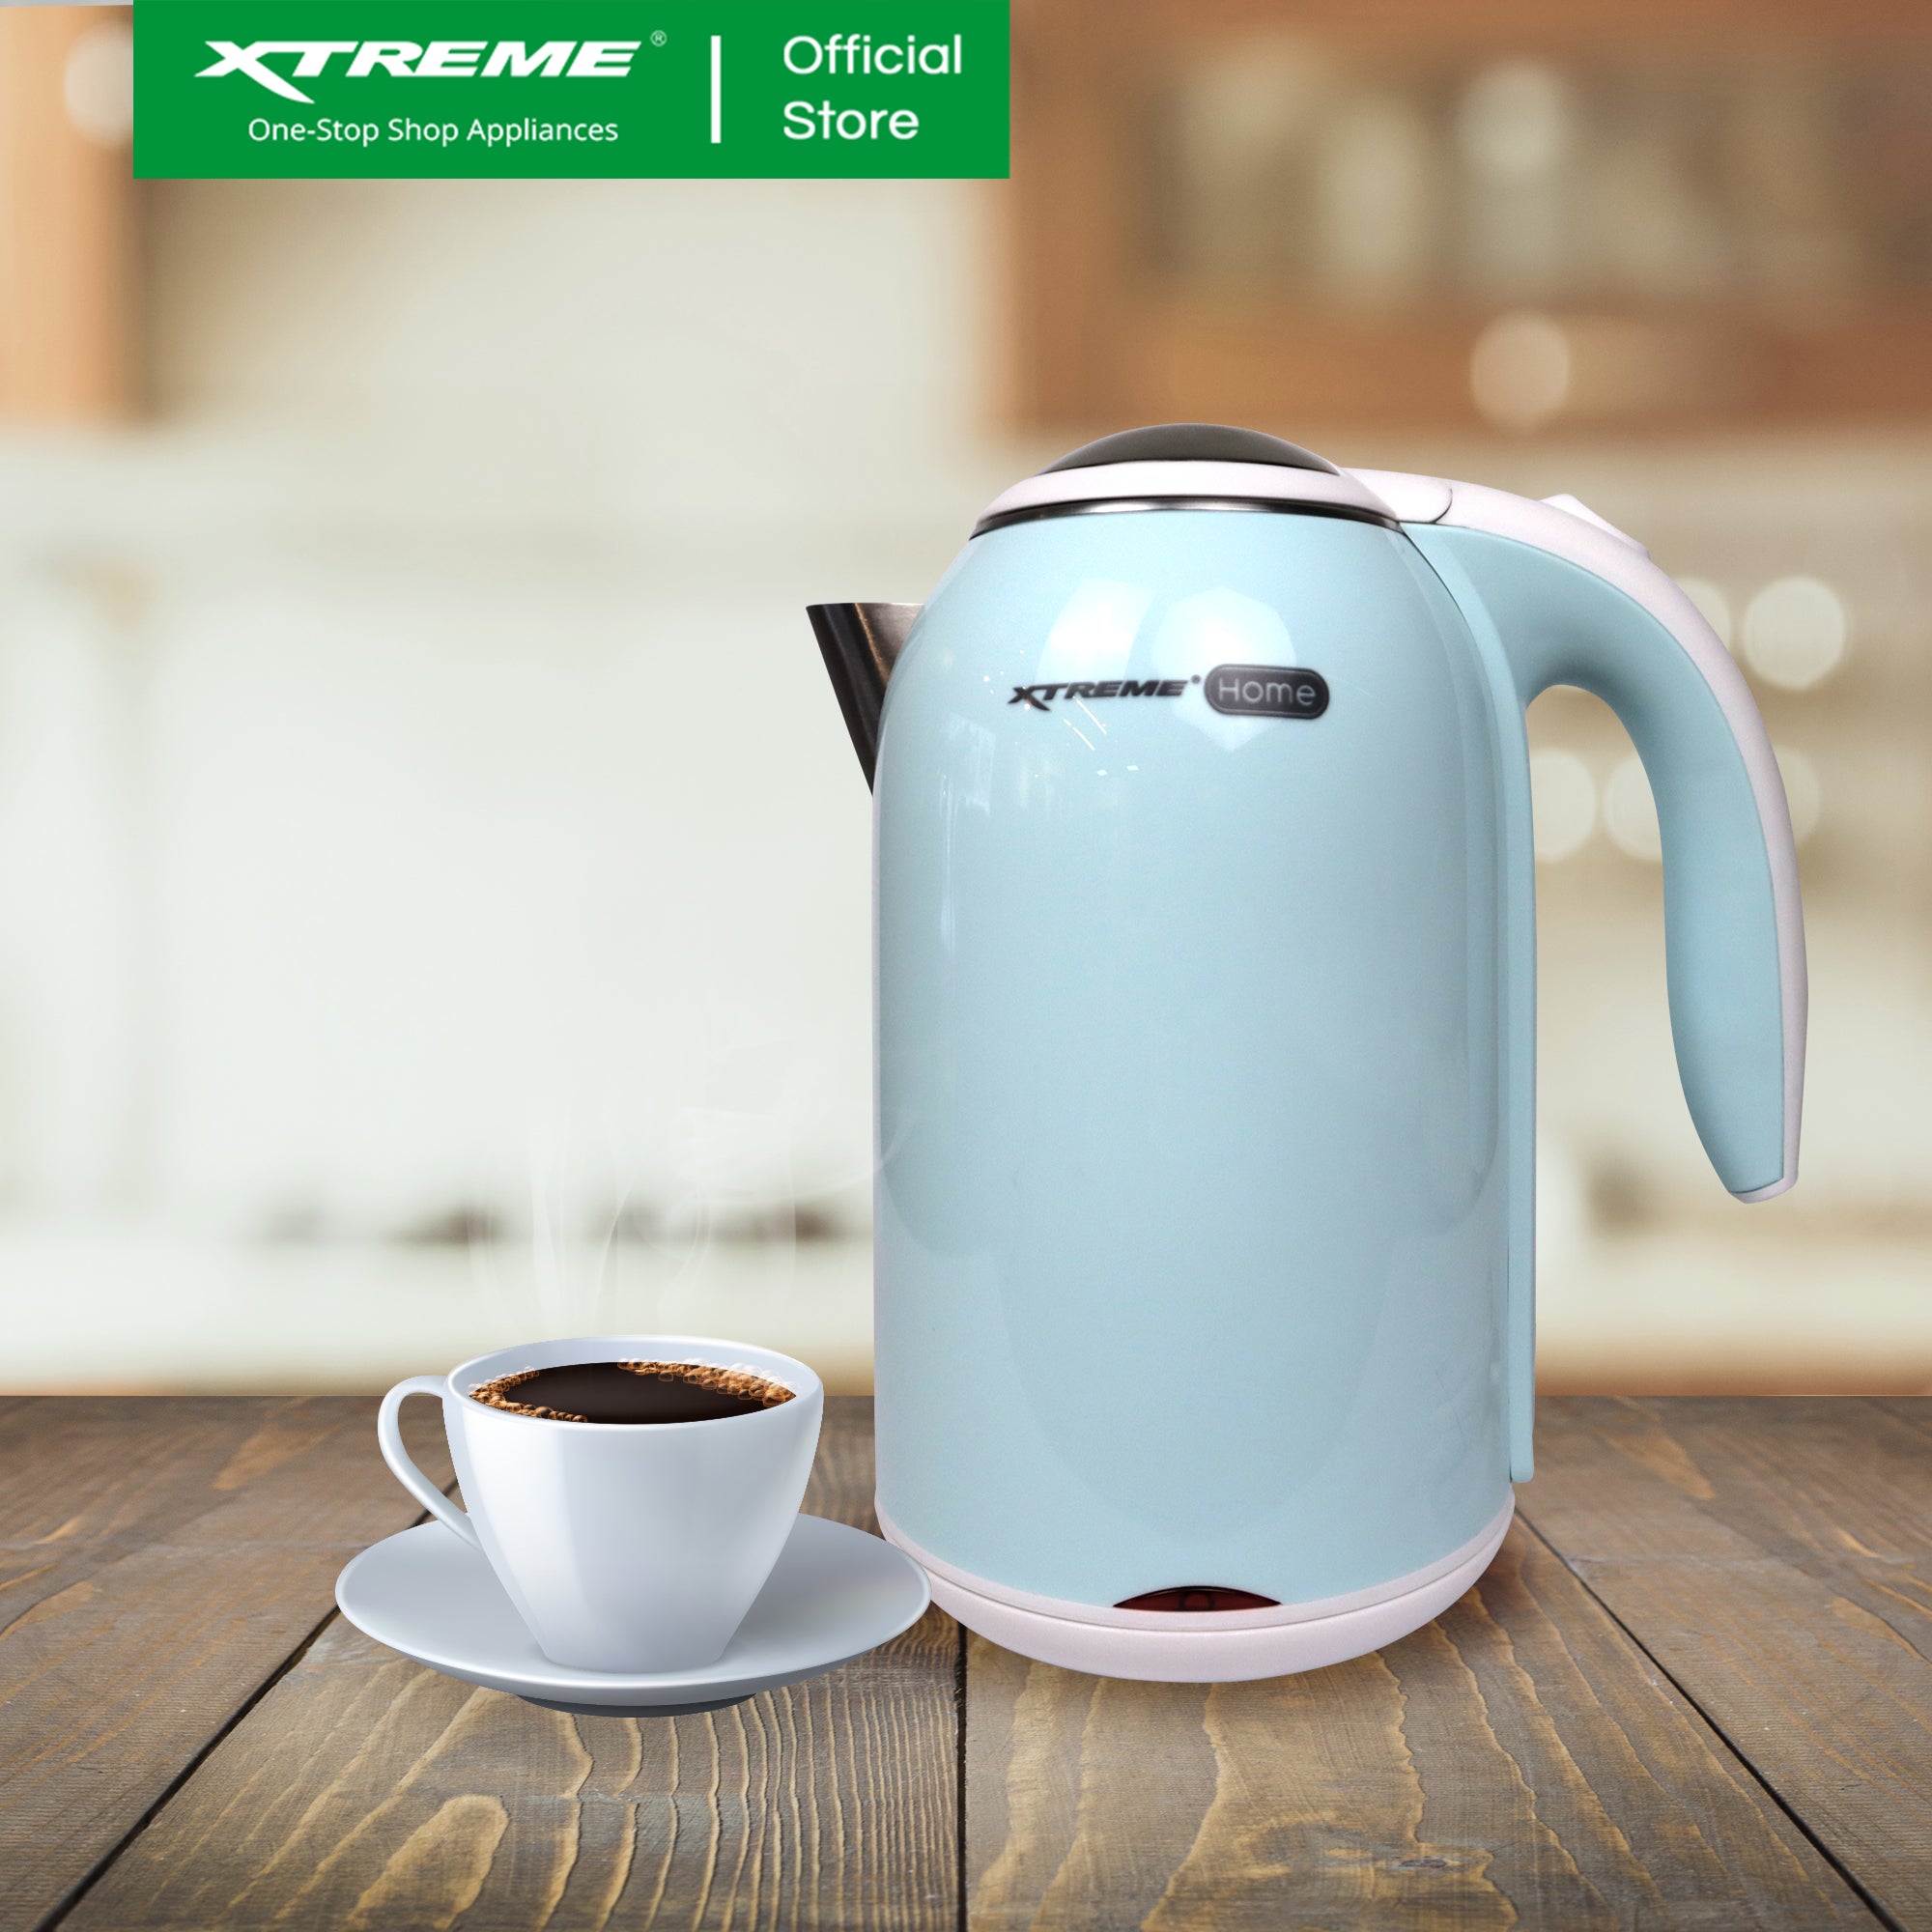 X-SERIES 1.7L Electric Kettle Cordless with Automatic Power-off (Blue) | XH-KT-DWOPH17BLUEX